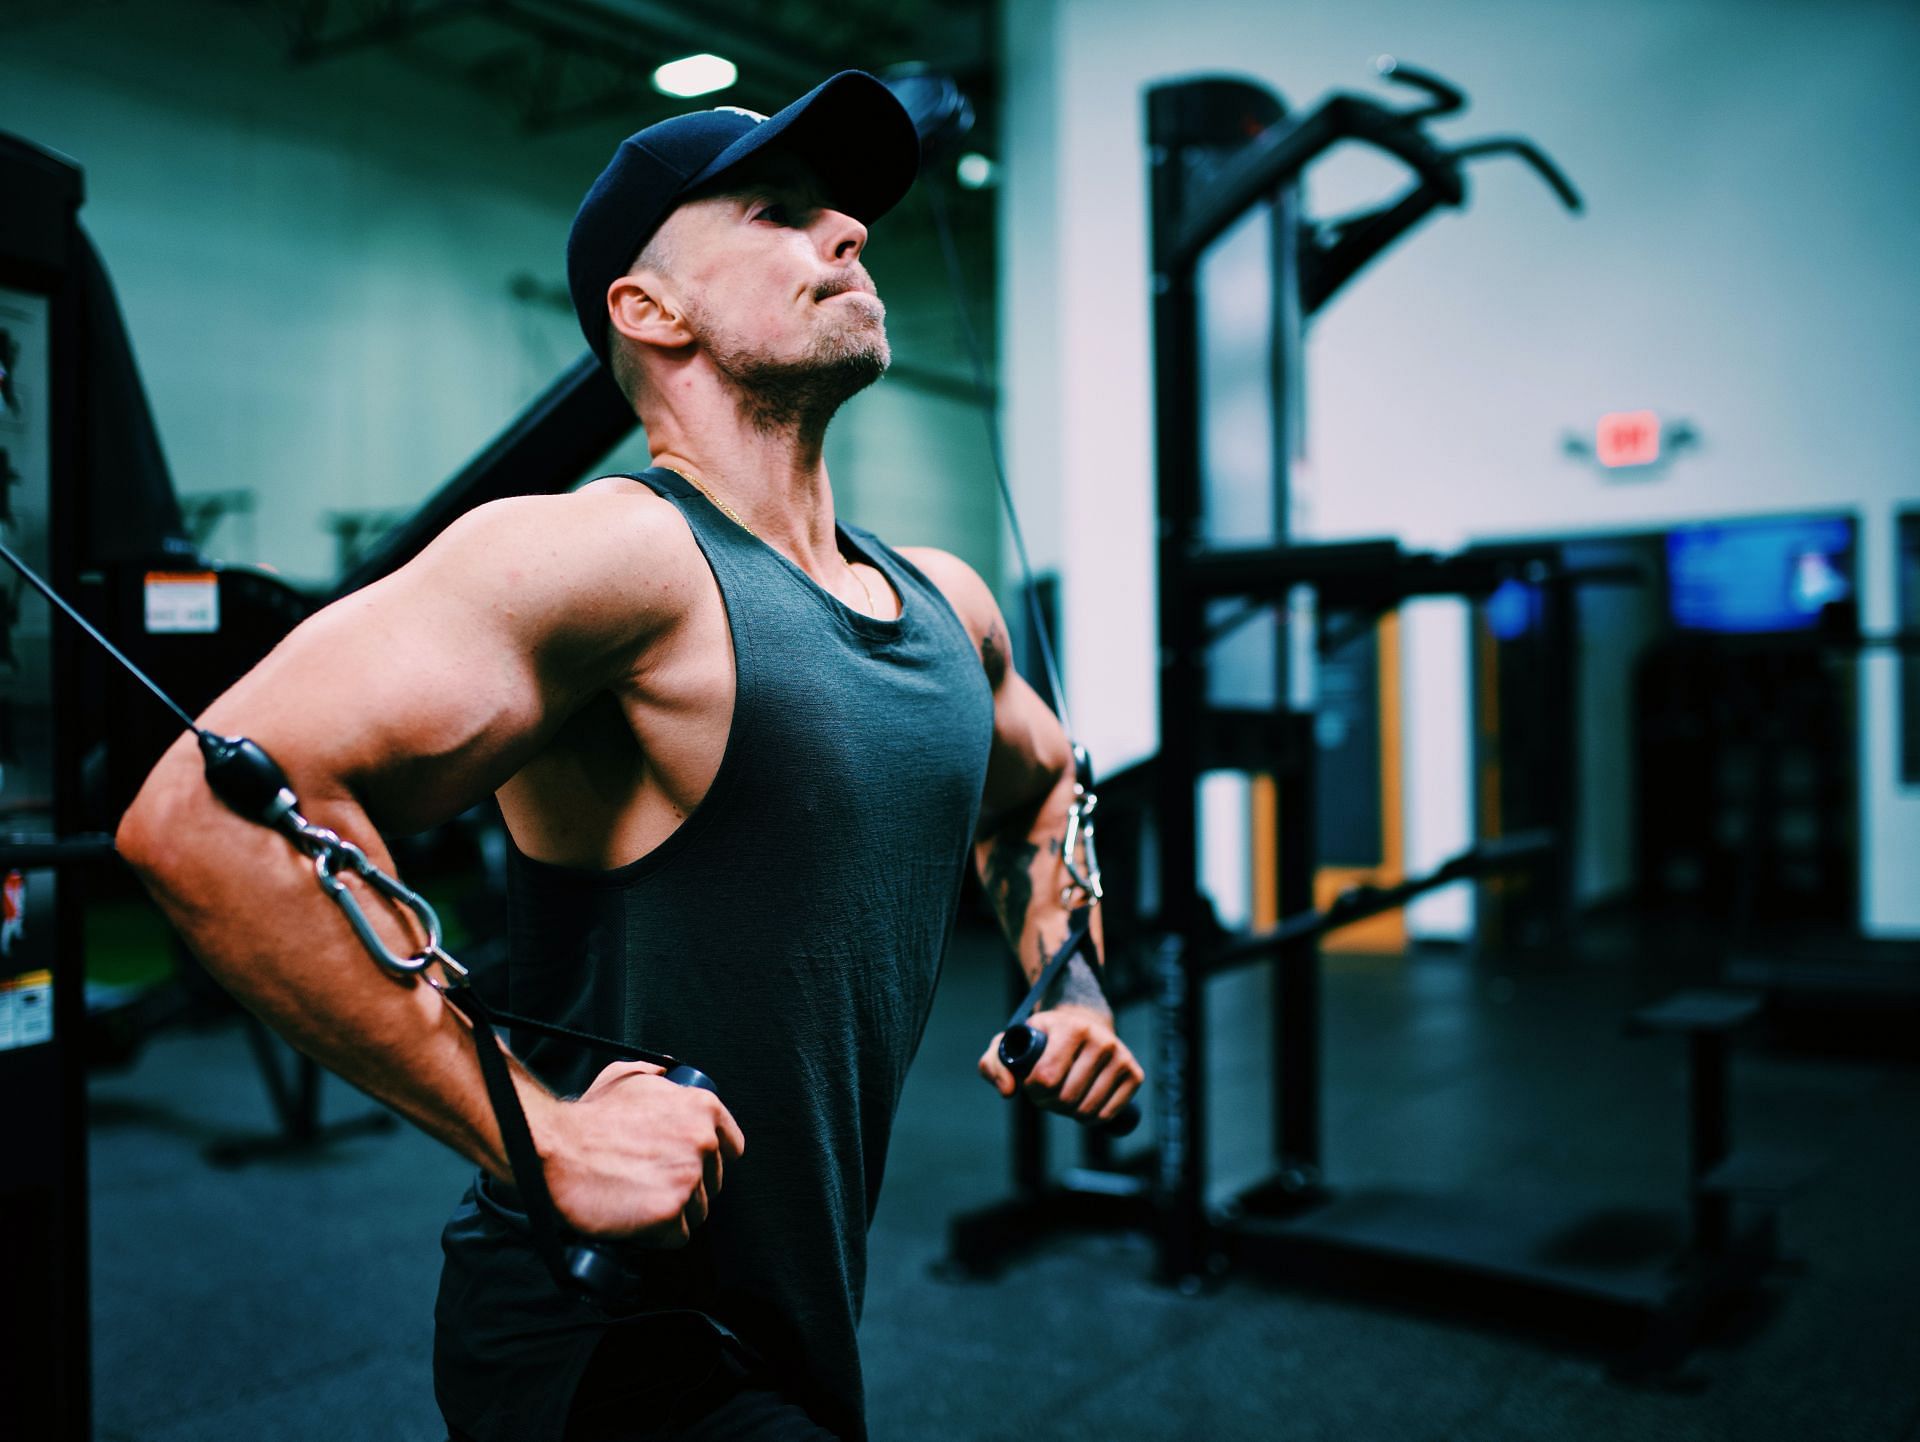 Some Chest Workouts That Will Sculpt And Define Your Chest